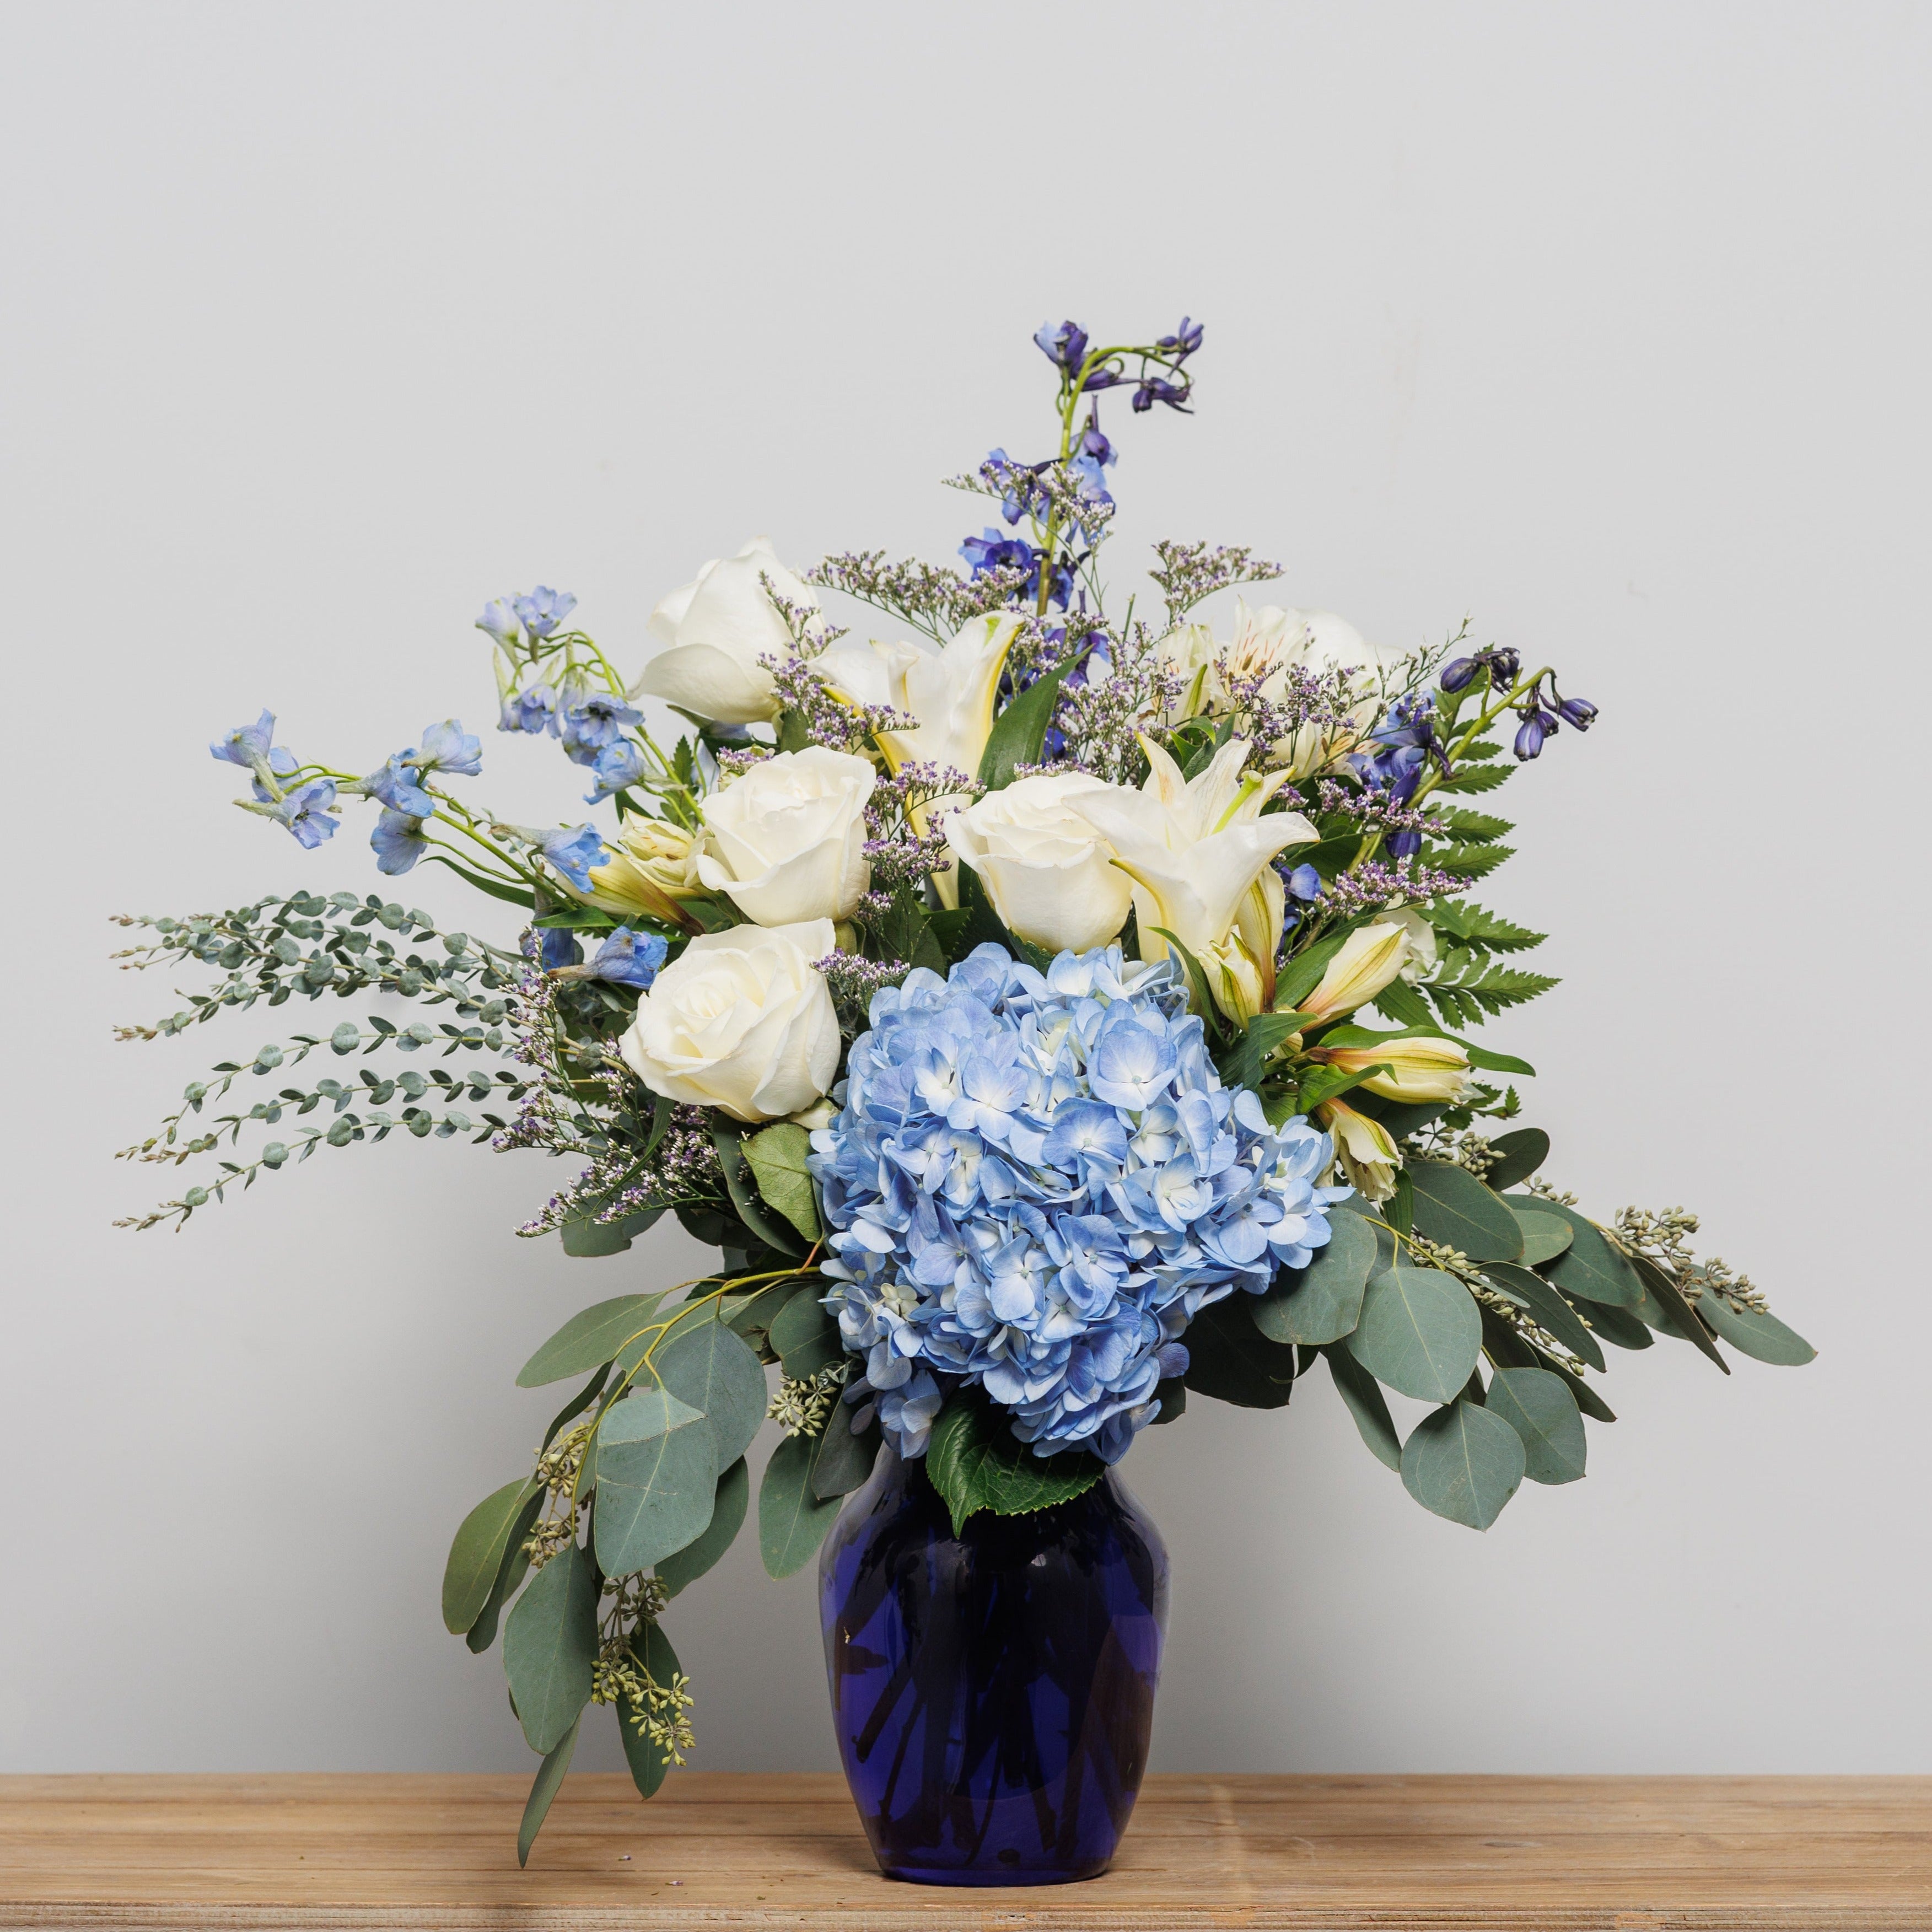 An arrangement with white roses, white lilies and blue hydrangea in a blue vase.